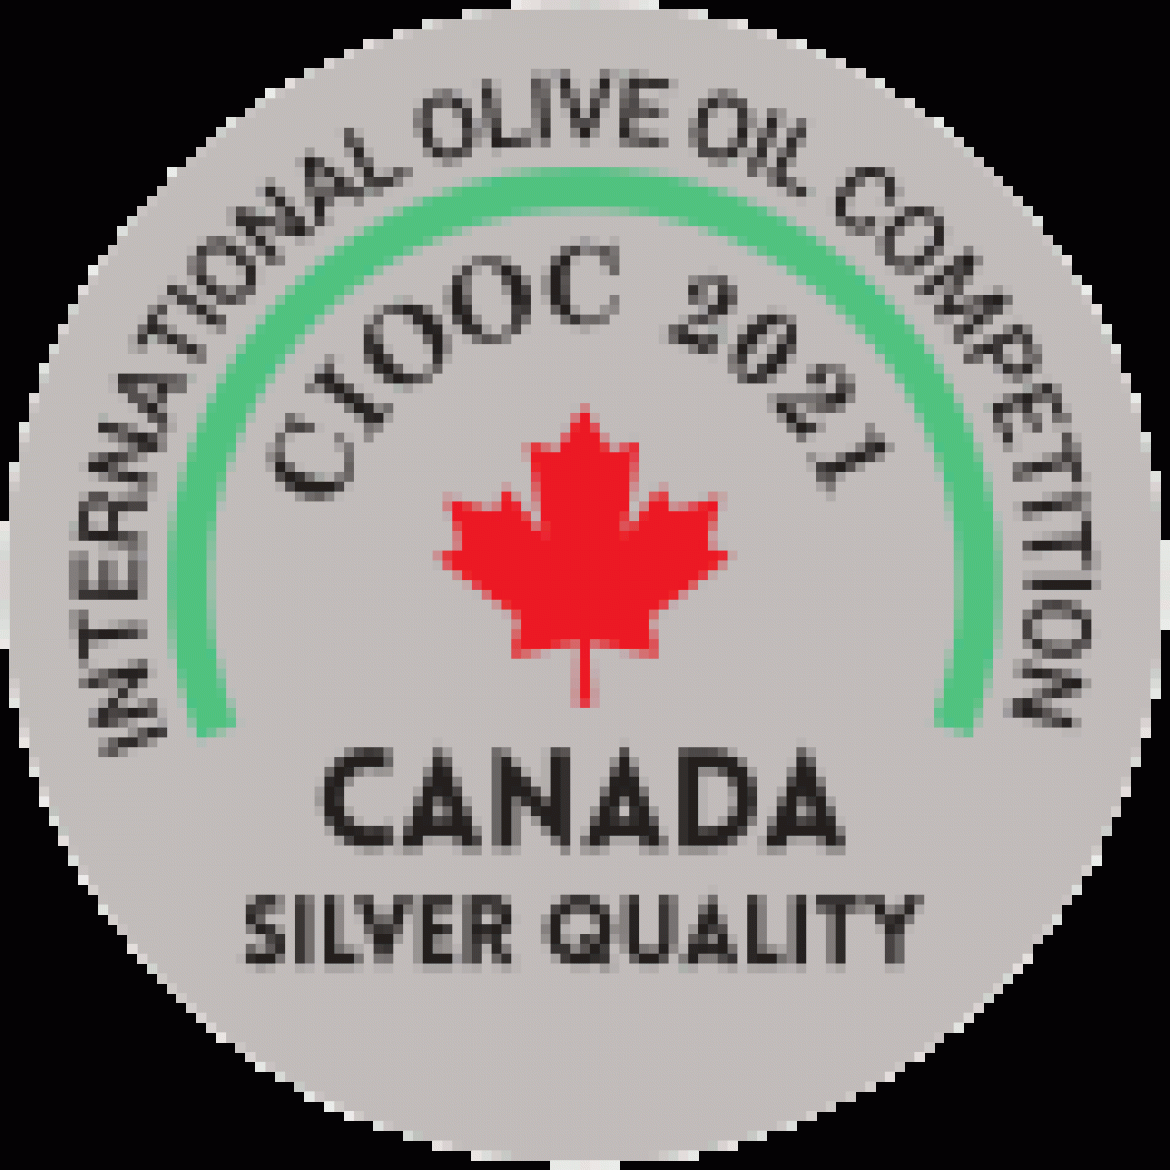 Canada-IOOC-2021-QUALITY-SILVER_croped.gif